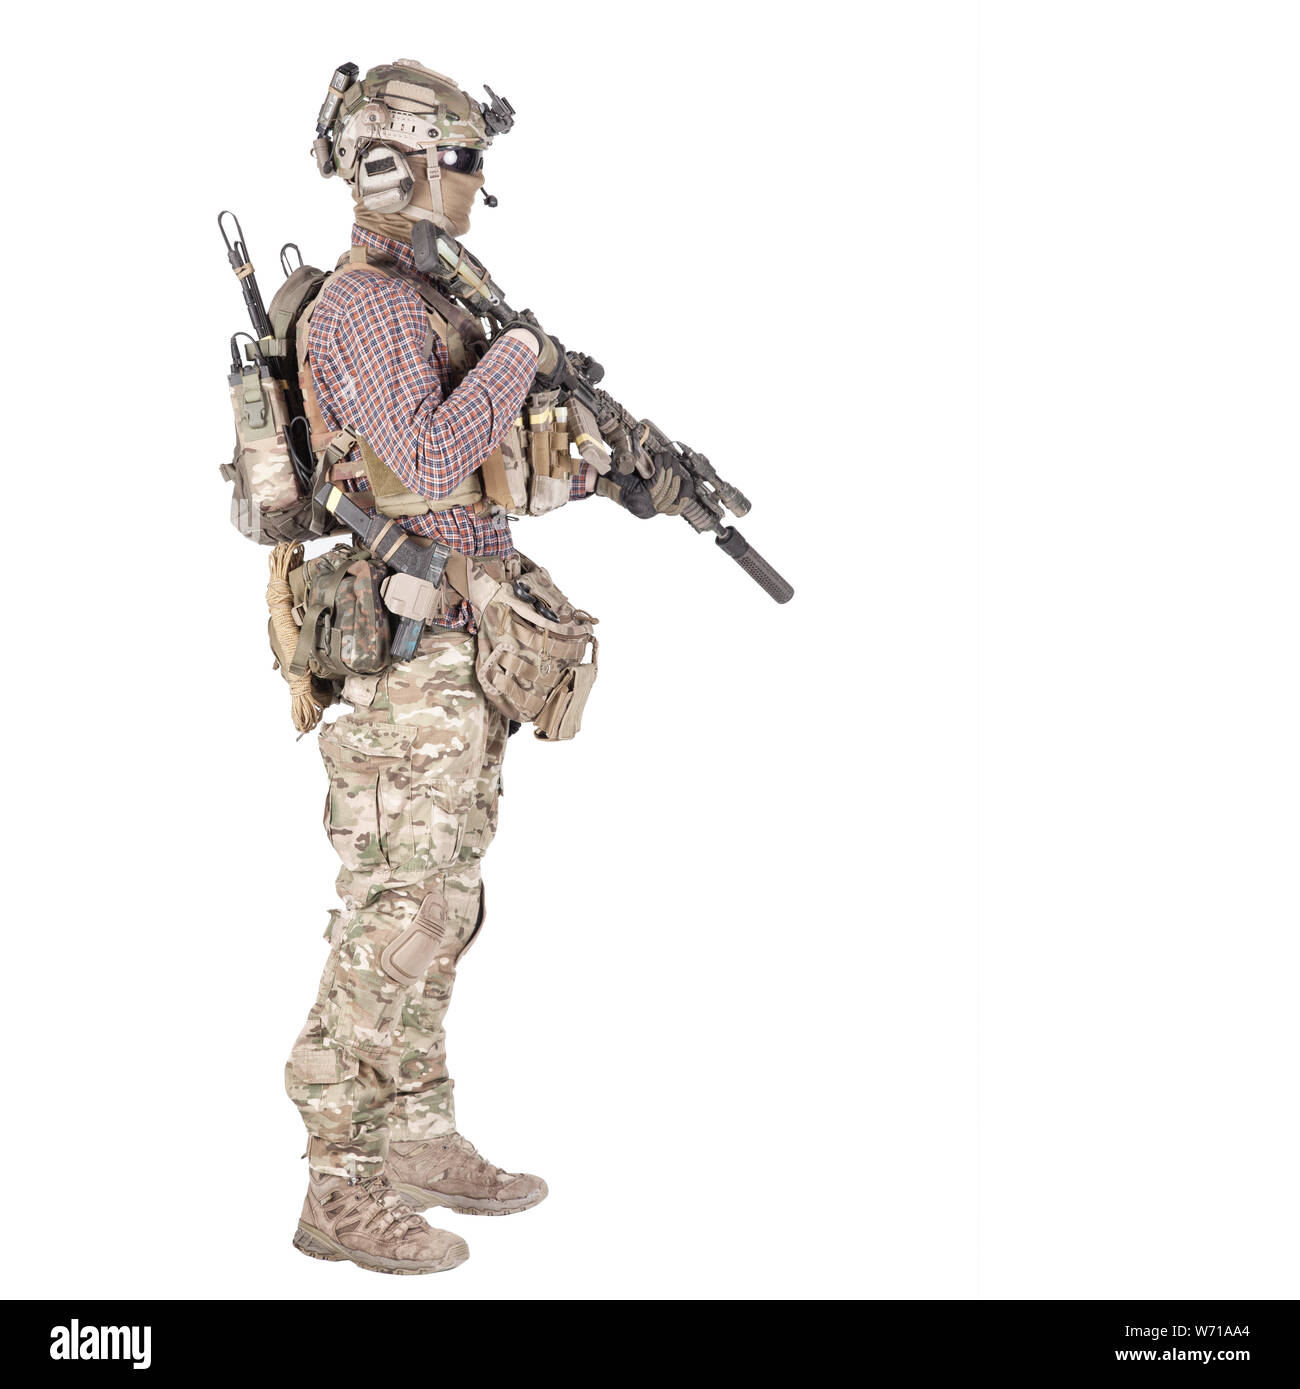 Full length portrait of airsoft player in checkered shirt, wearing camouflage uniform, helmet with tactical radio headset, body armour, aiming with service rifle replica studio shoot isolated on white Stock Photo